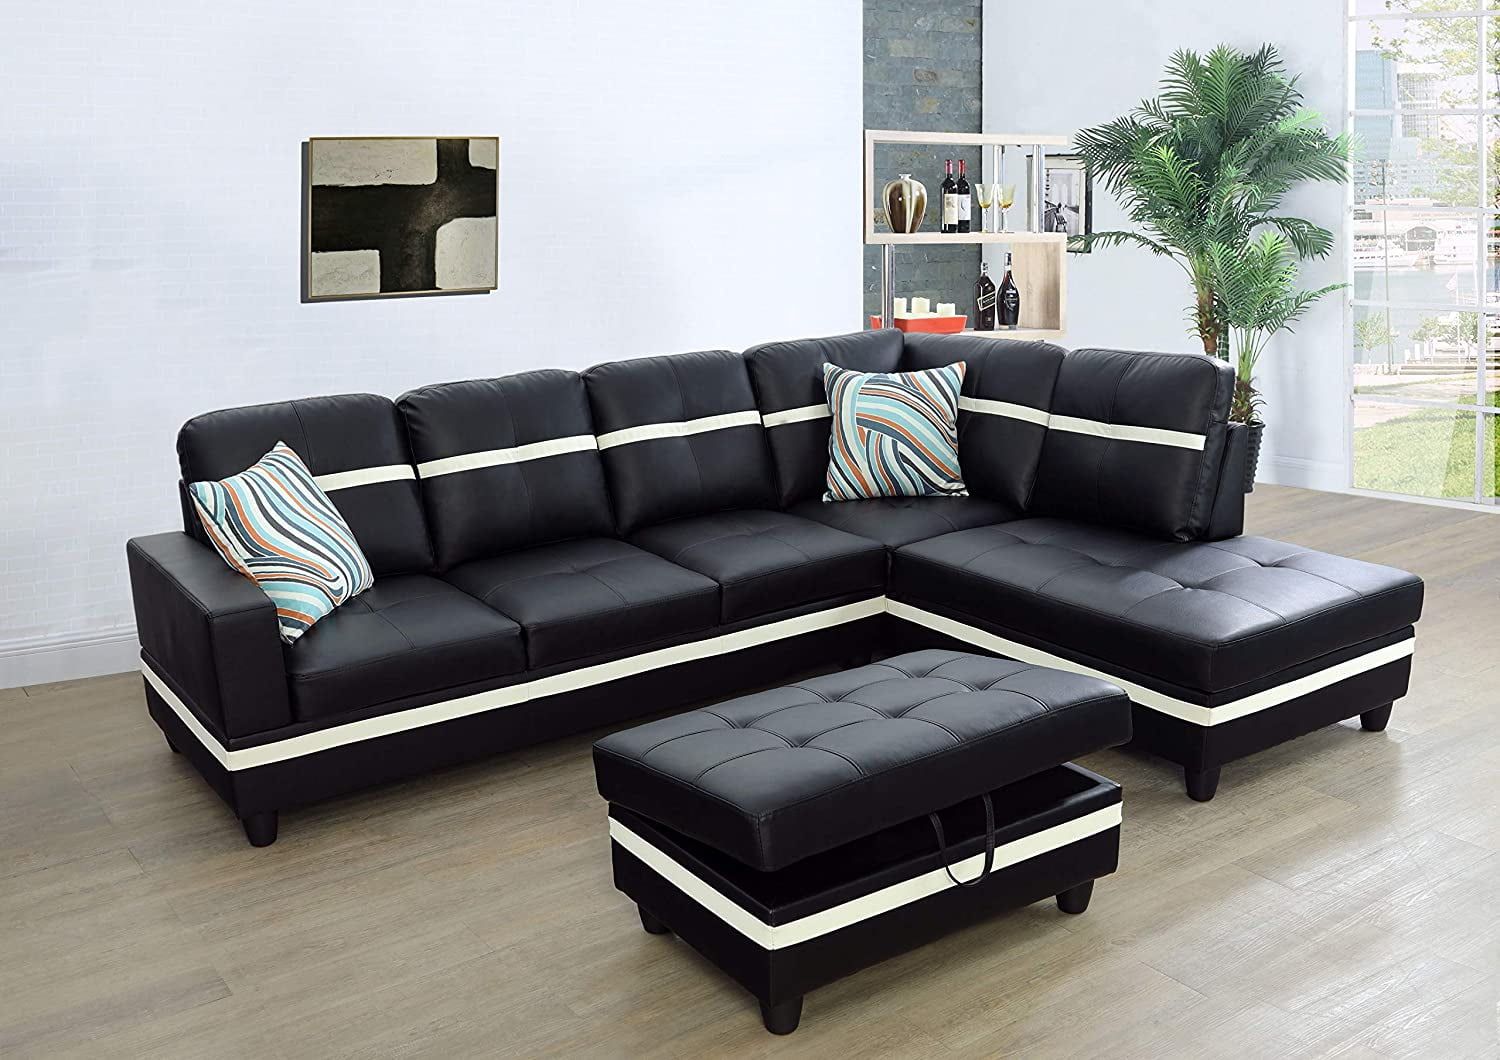 Ponliving Furniture Faux Leather 3 Piece Sectional Sofa Couch Set, L Shaped  Modern Sofa With Chaise Storage Ottoman And Pillows For Living Room  Furniture – Walmart In 3 Piece Leather Sectional Sofa Sets (View 13 of 15)